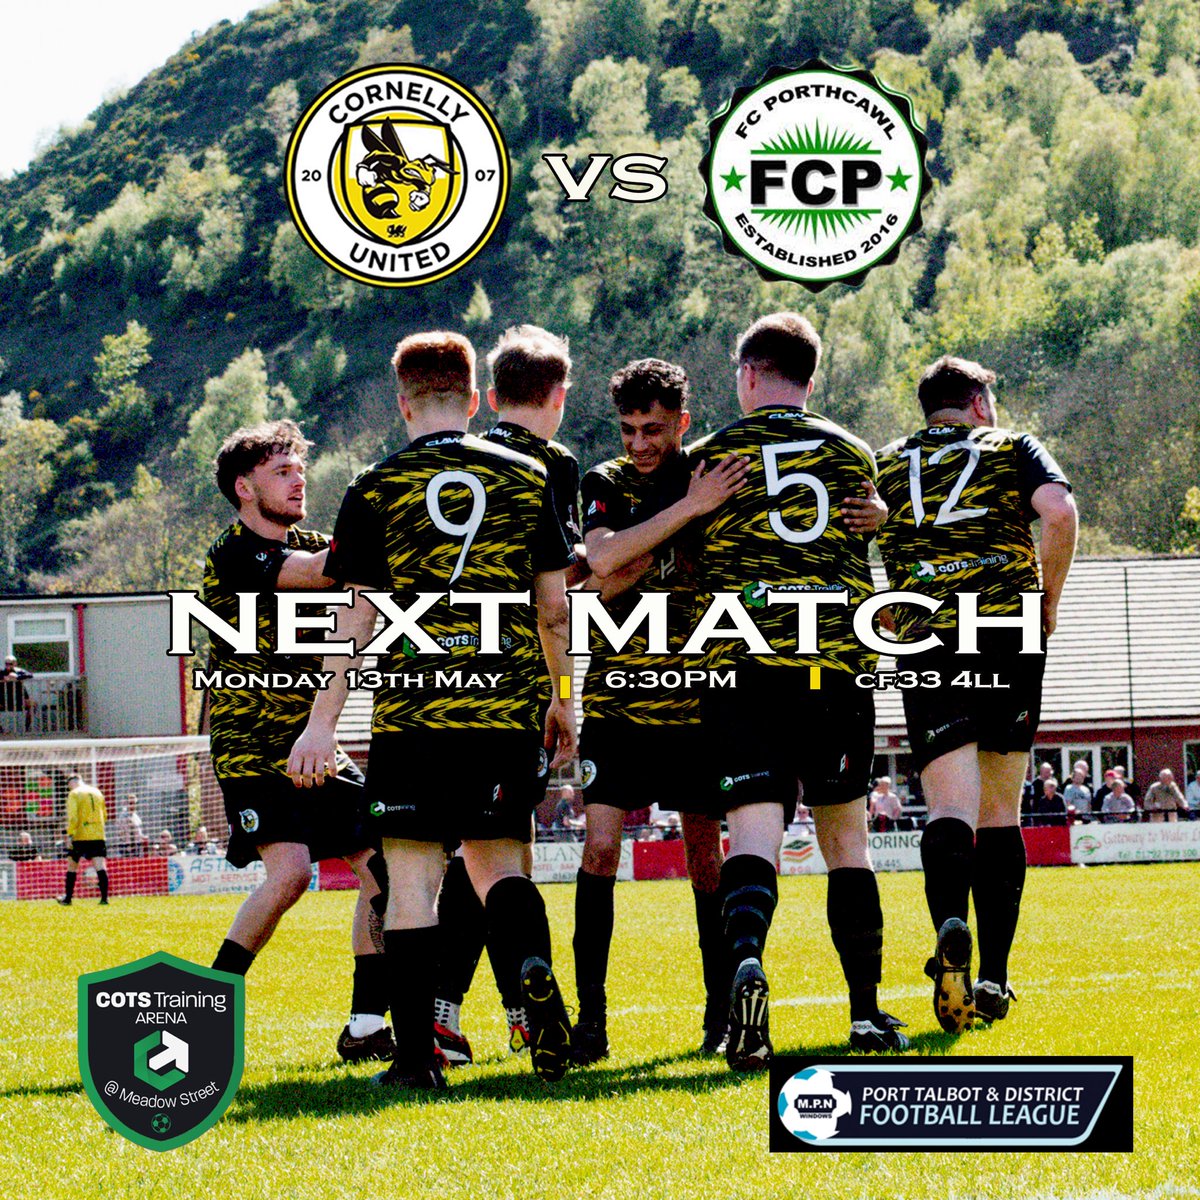 Tonight at the Cots Arena Meadow Street. 

We welcome FC Porthcawl in what will be our last game of the 23/24 season a win will secure us as Runners Up for the season. 

We look forward to welcoming you all this afternoon kick off 6:30 pm 🐝